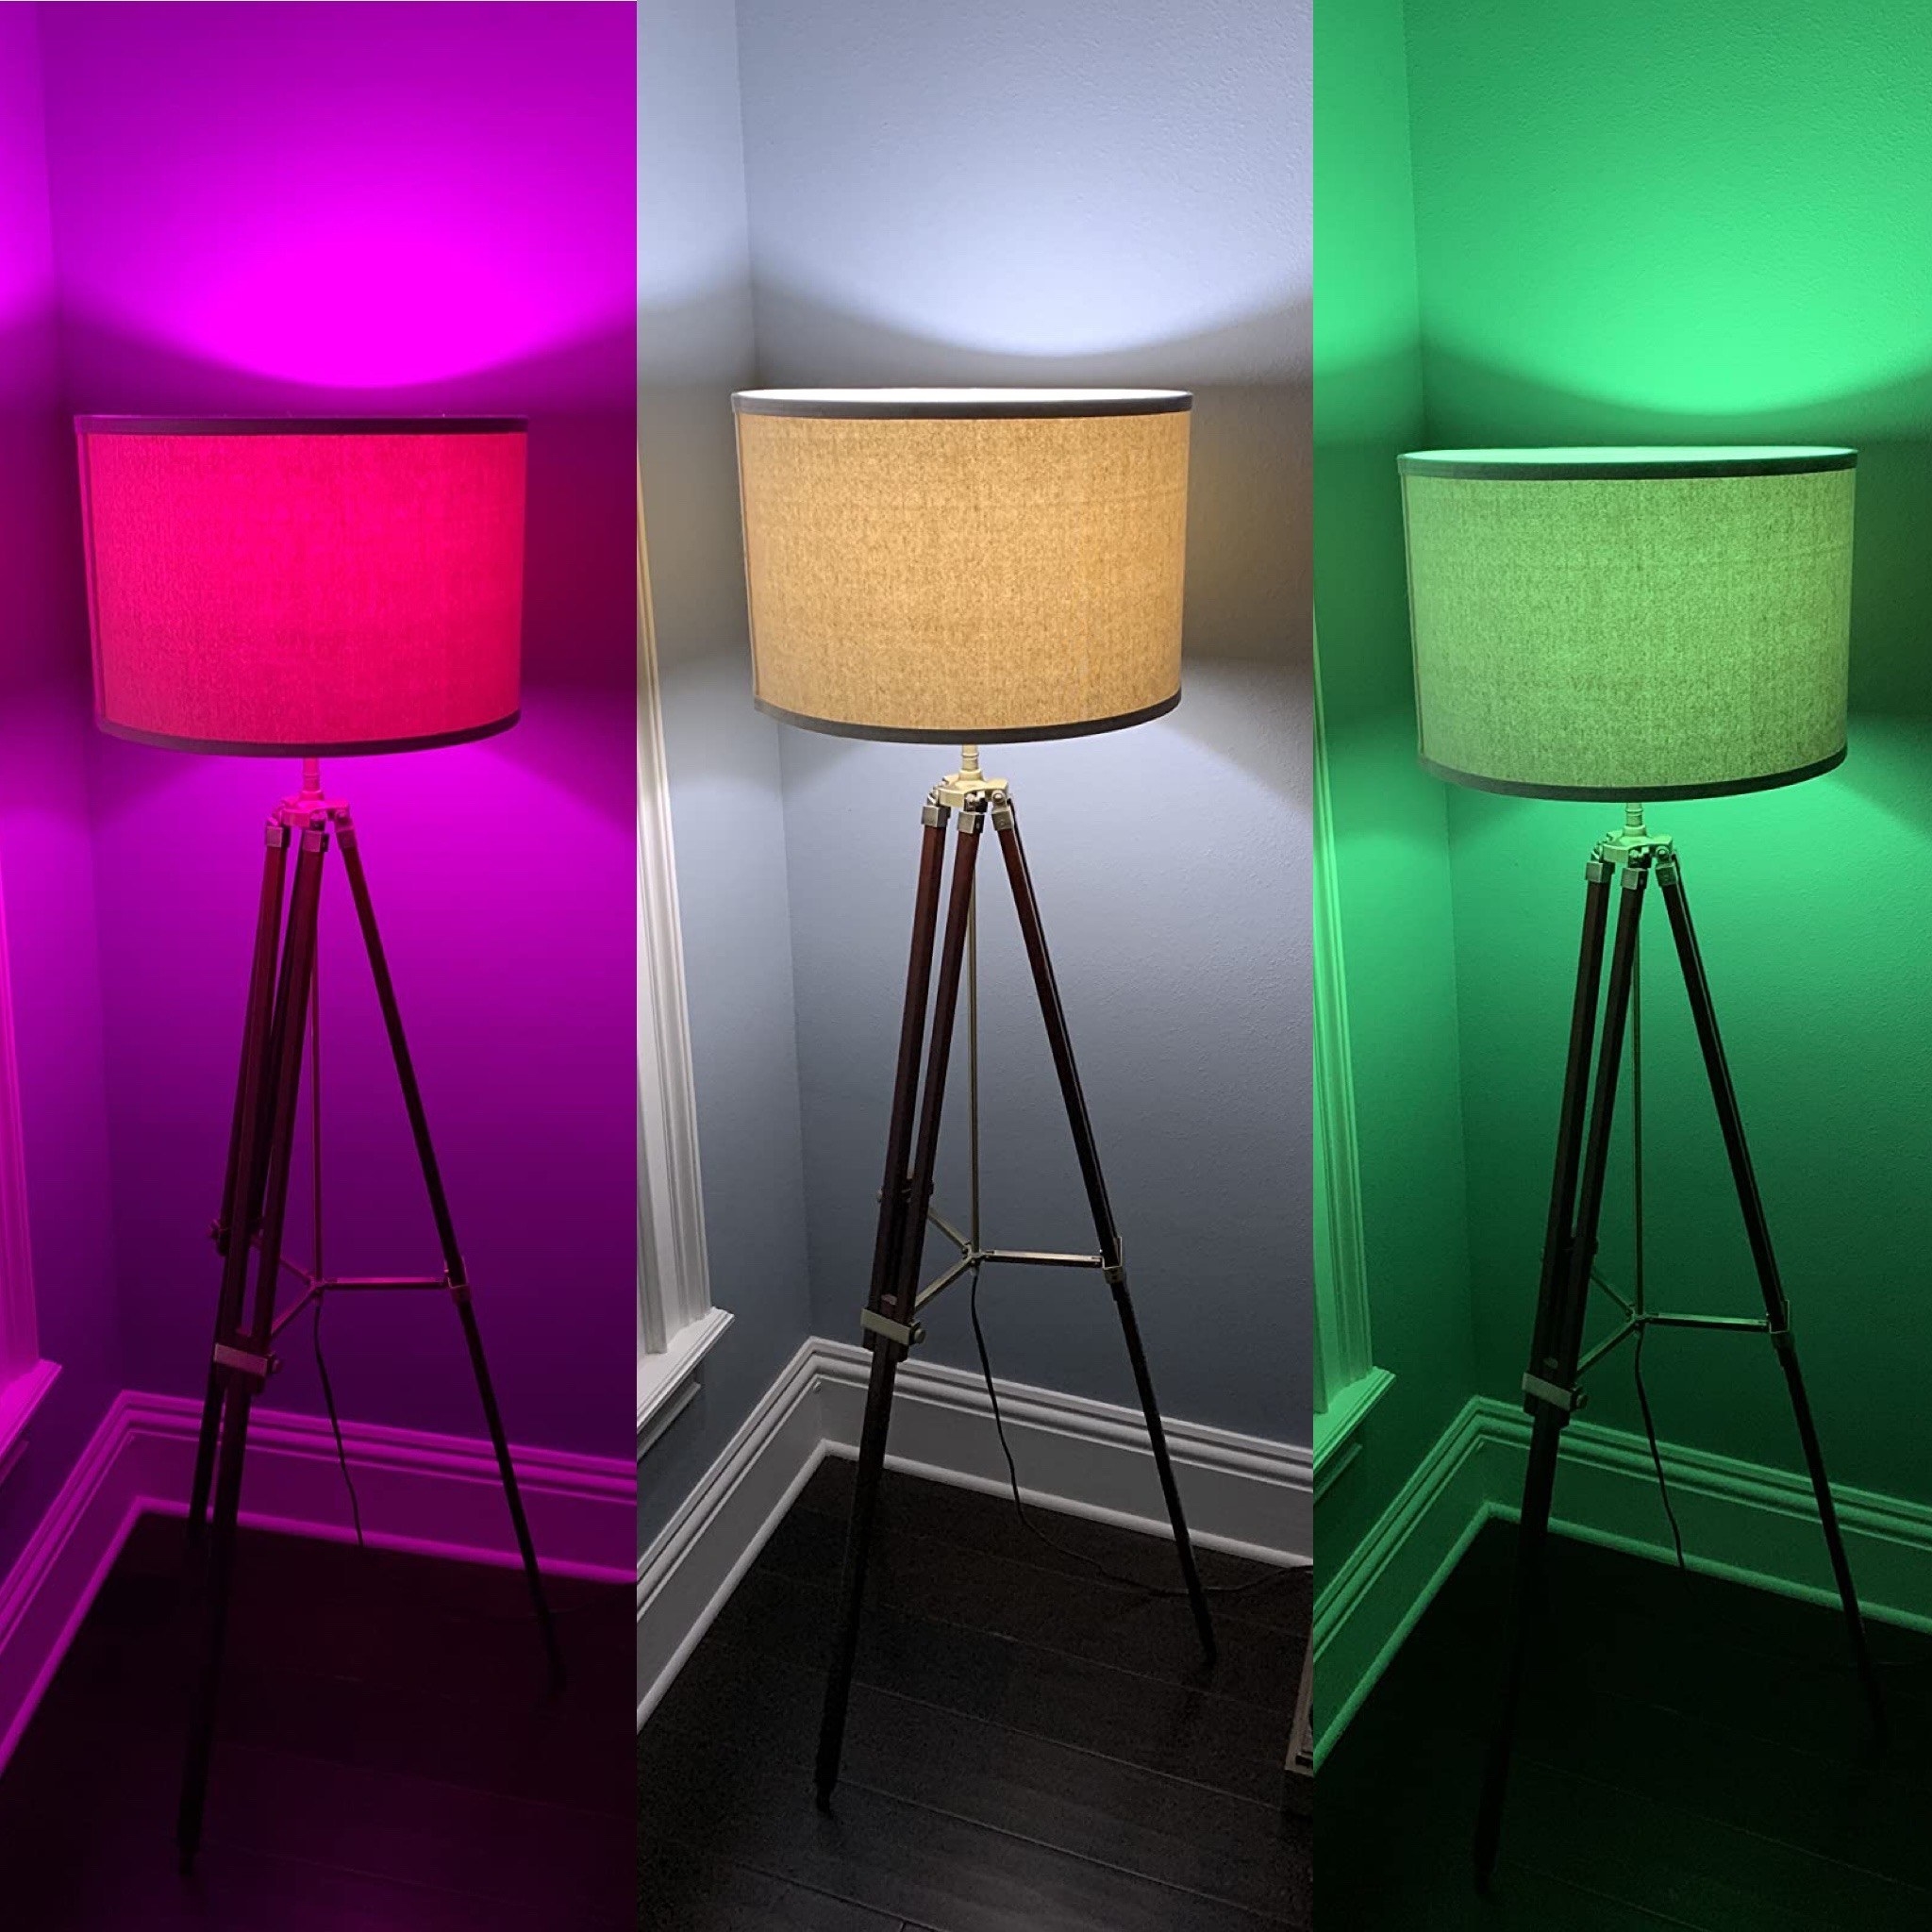 a review photo of the lamp on color pink daylight and green